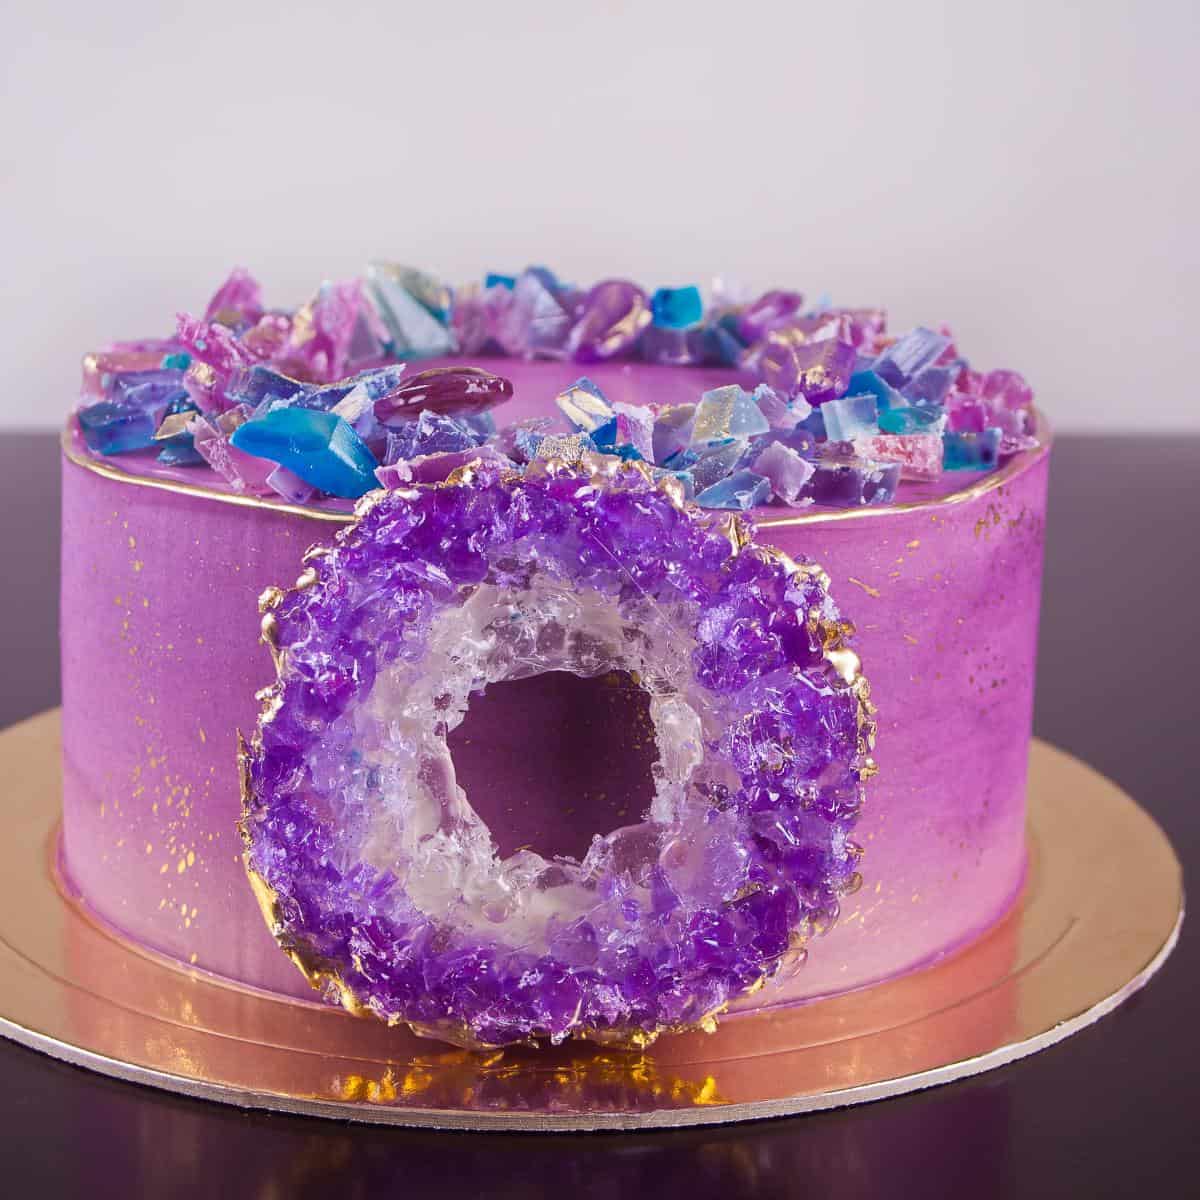 A cake with Isomalt geode.